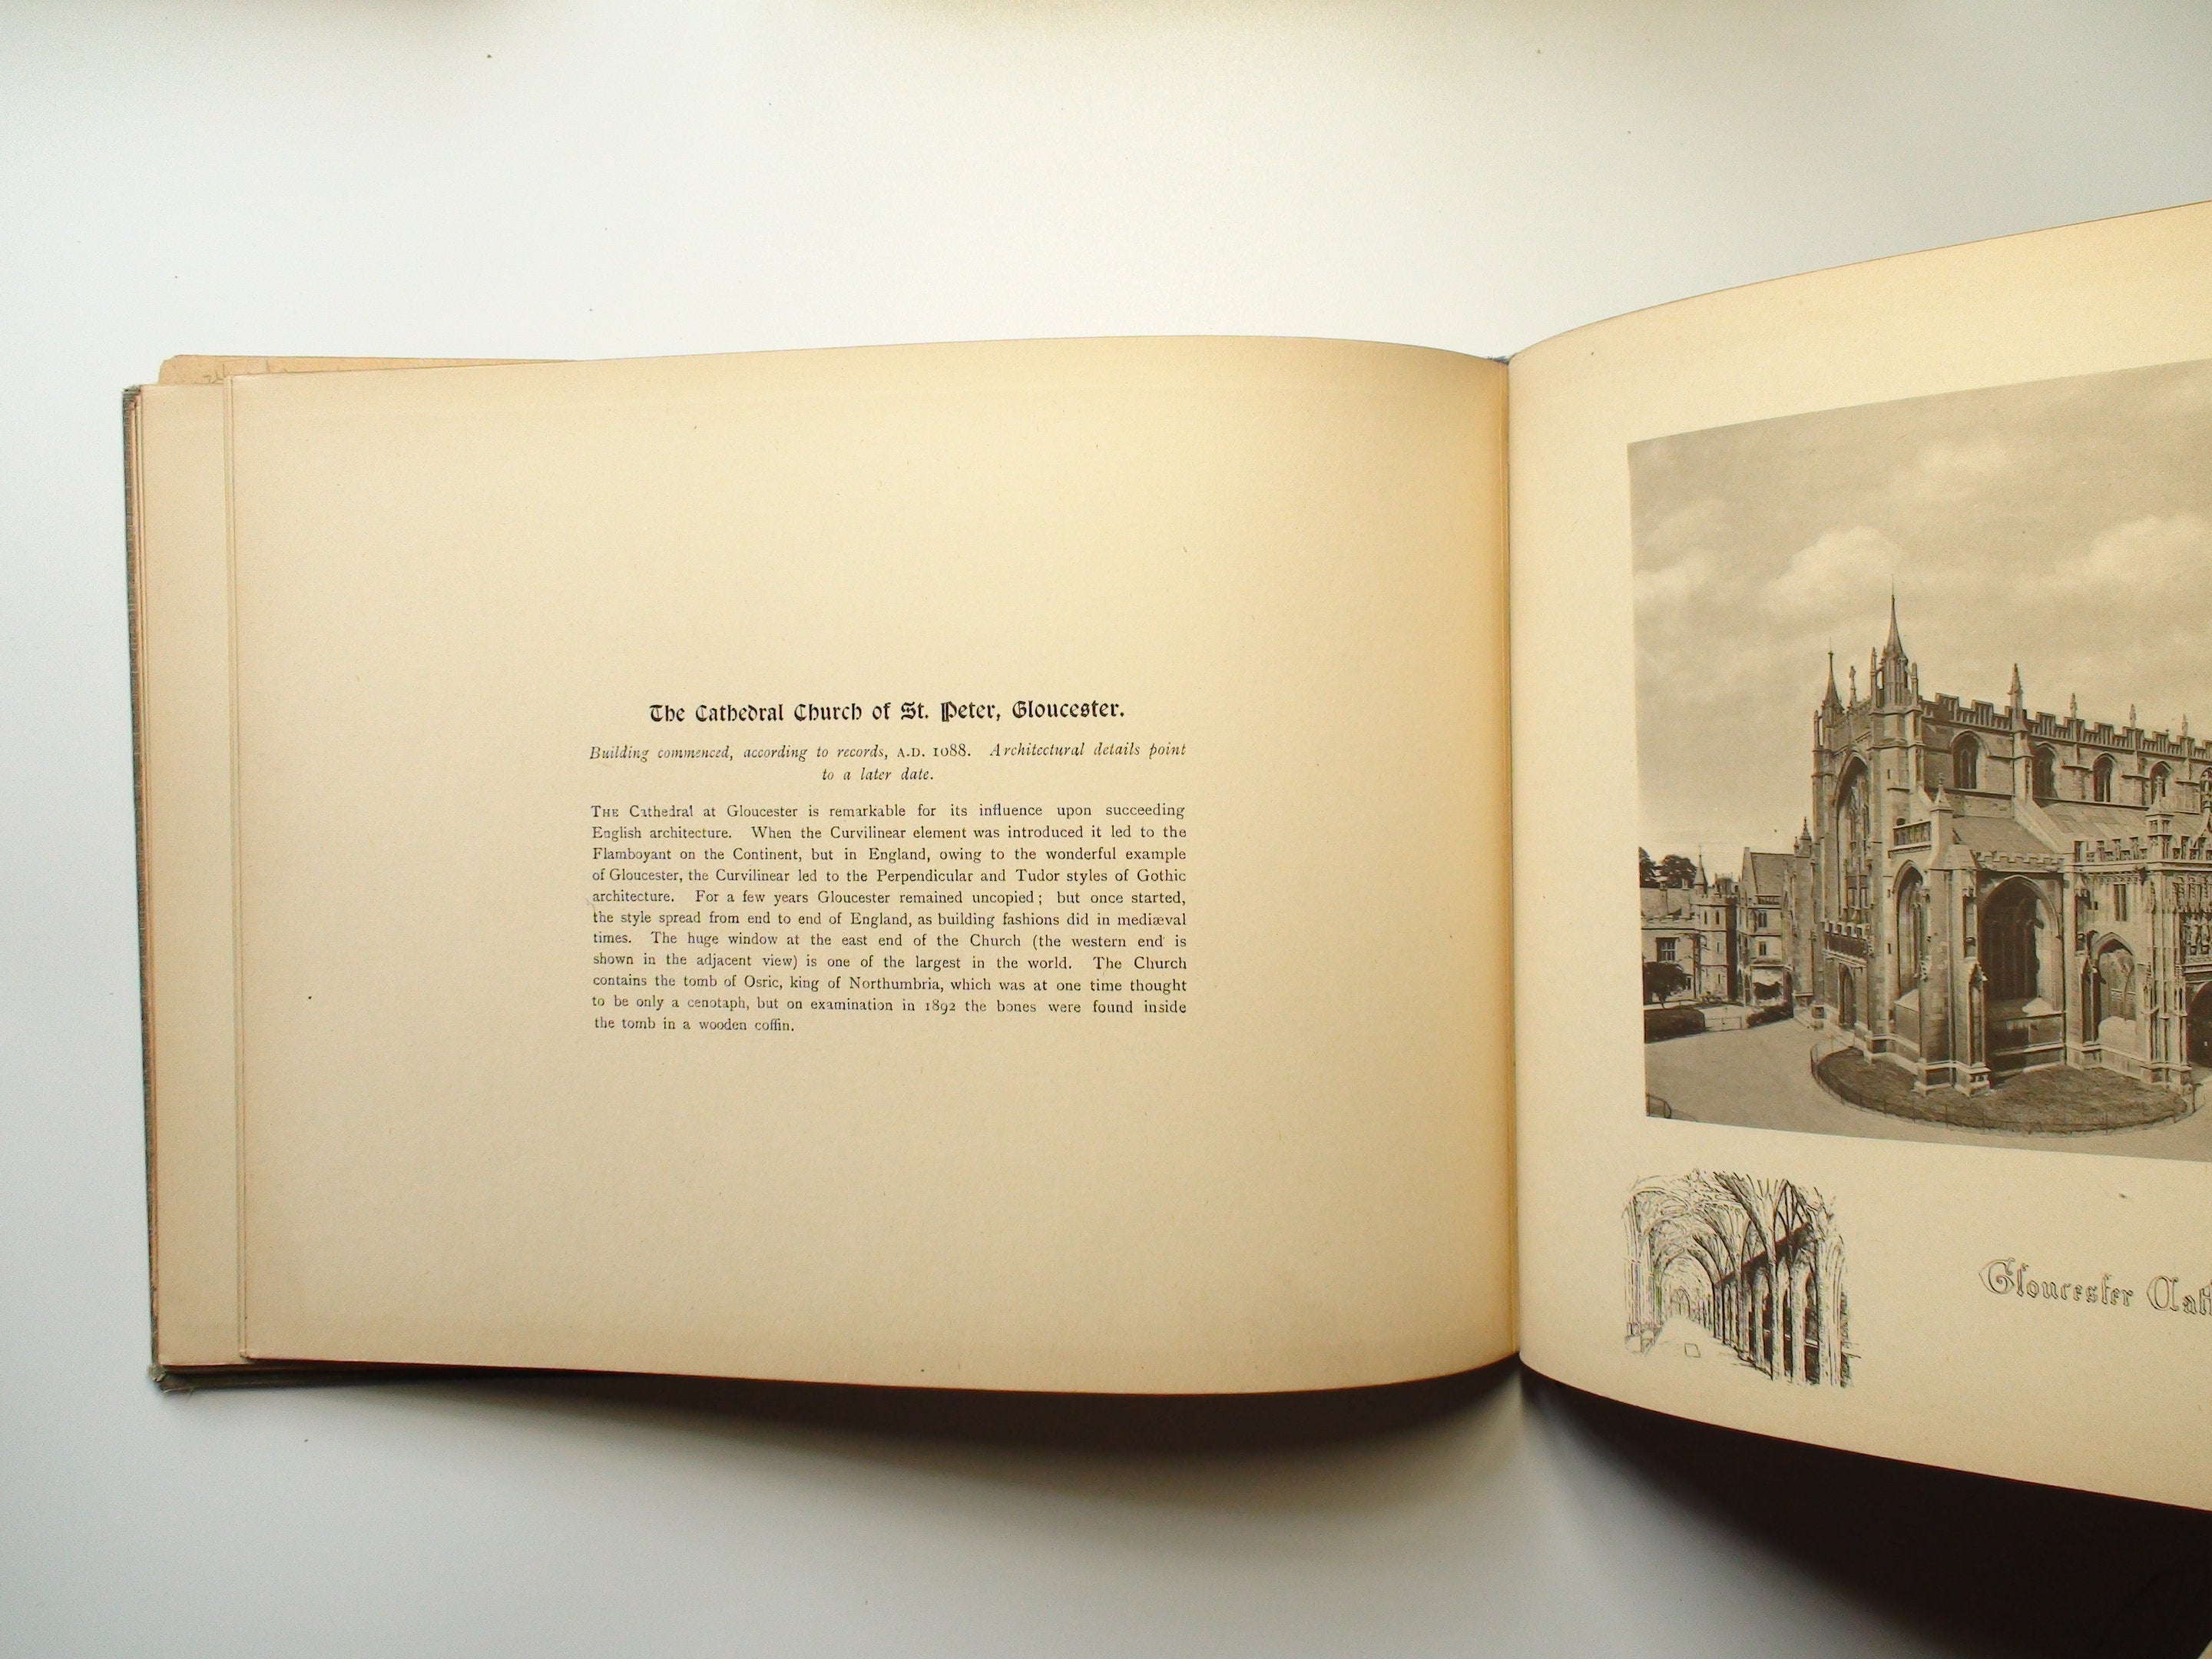 The Cathedral Churches of England, Eyre and Spottiswode, Illustrated, c1924